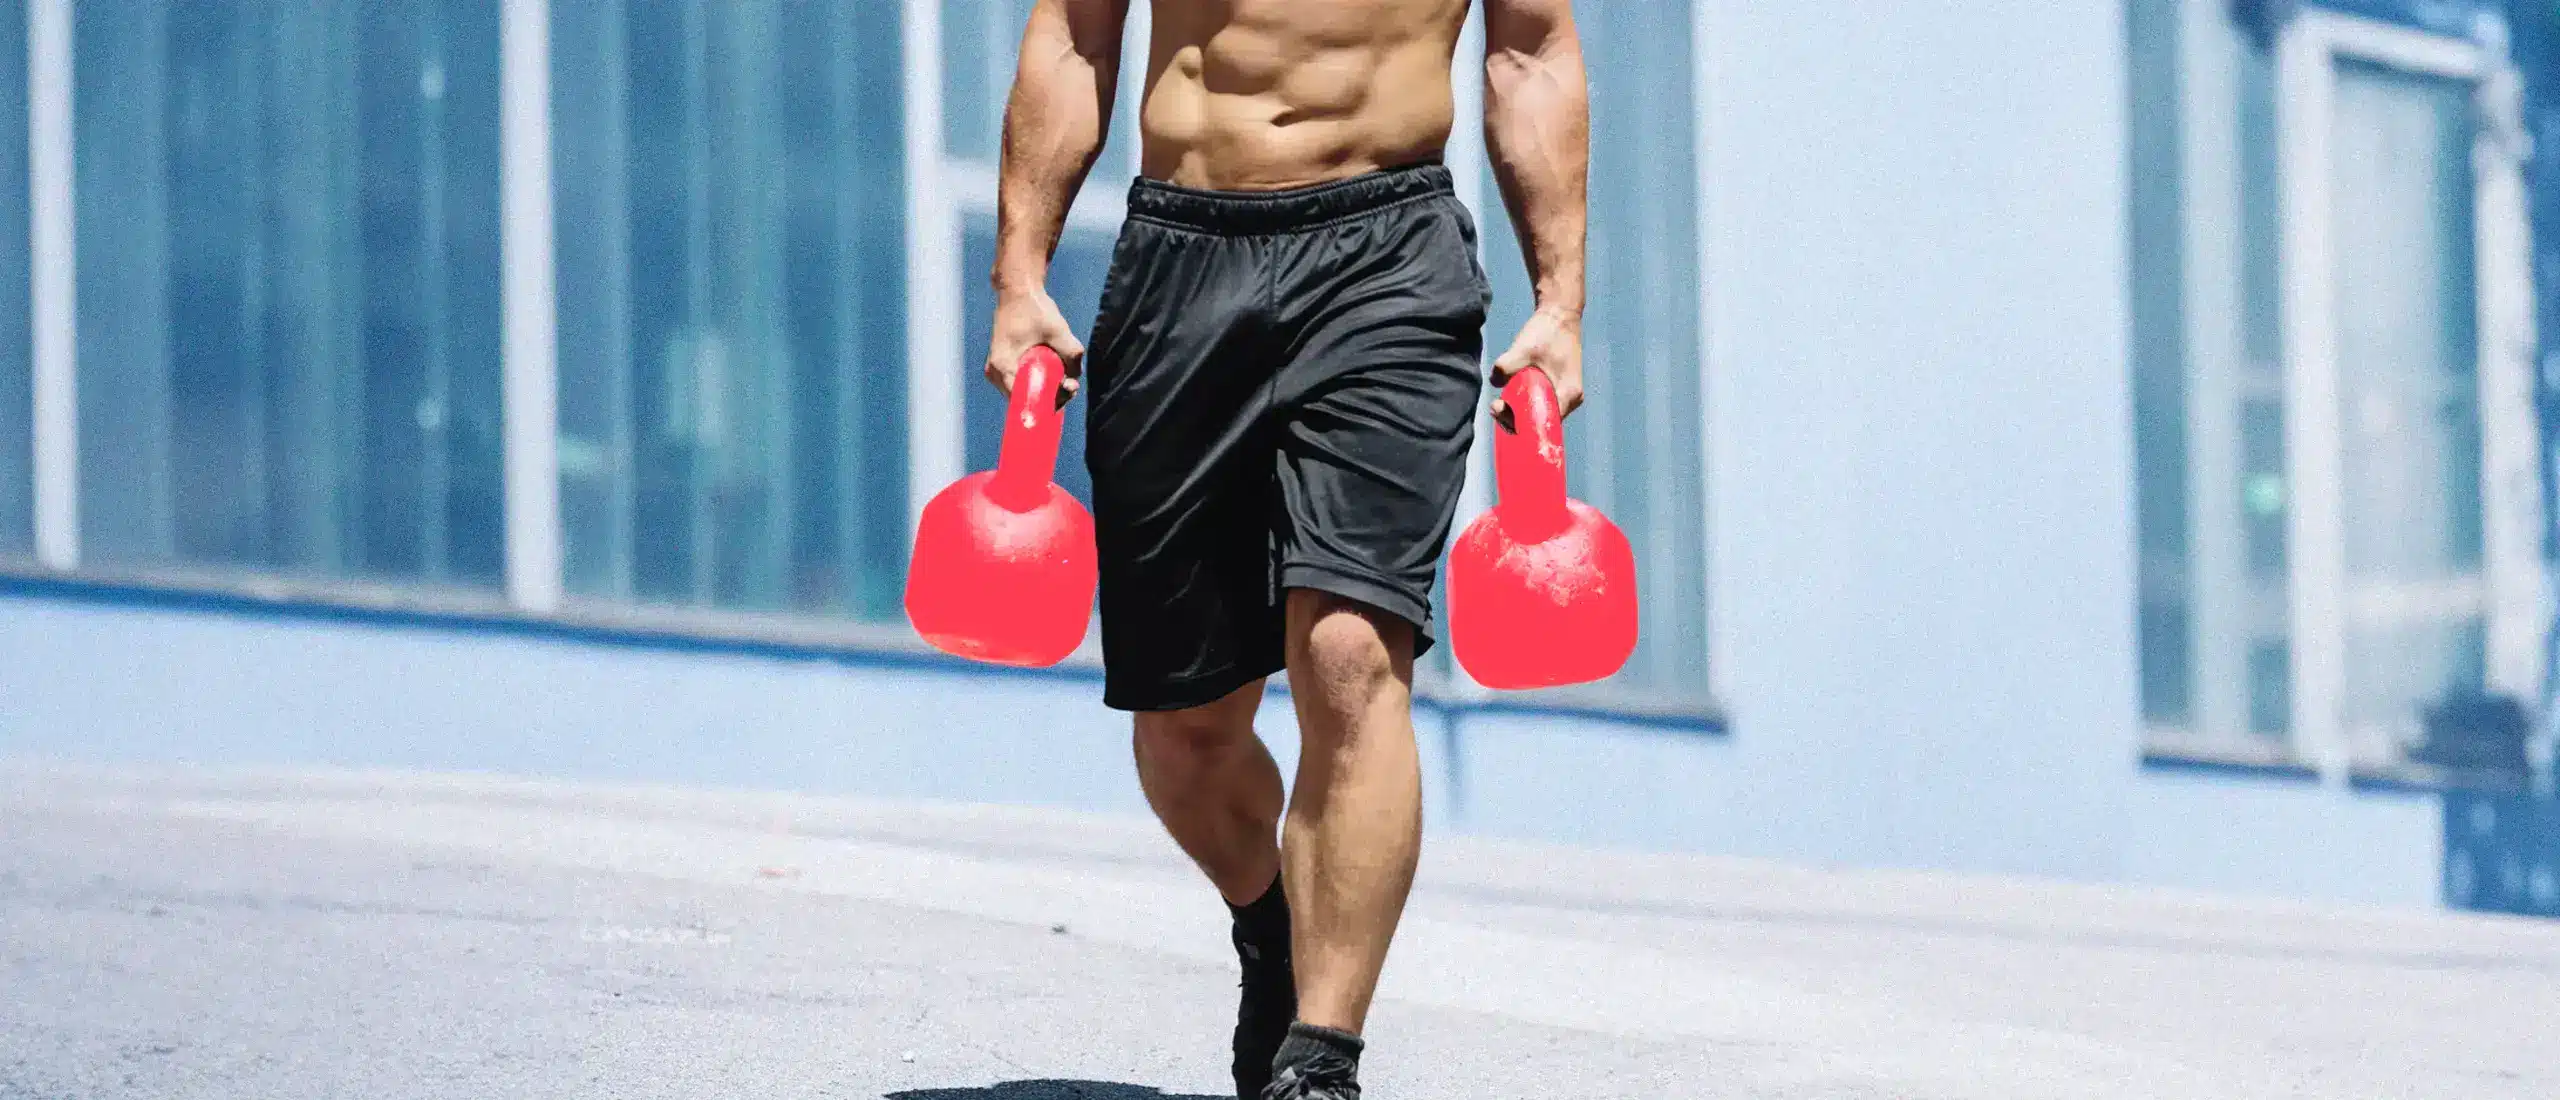 Man carrying two dumbbells